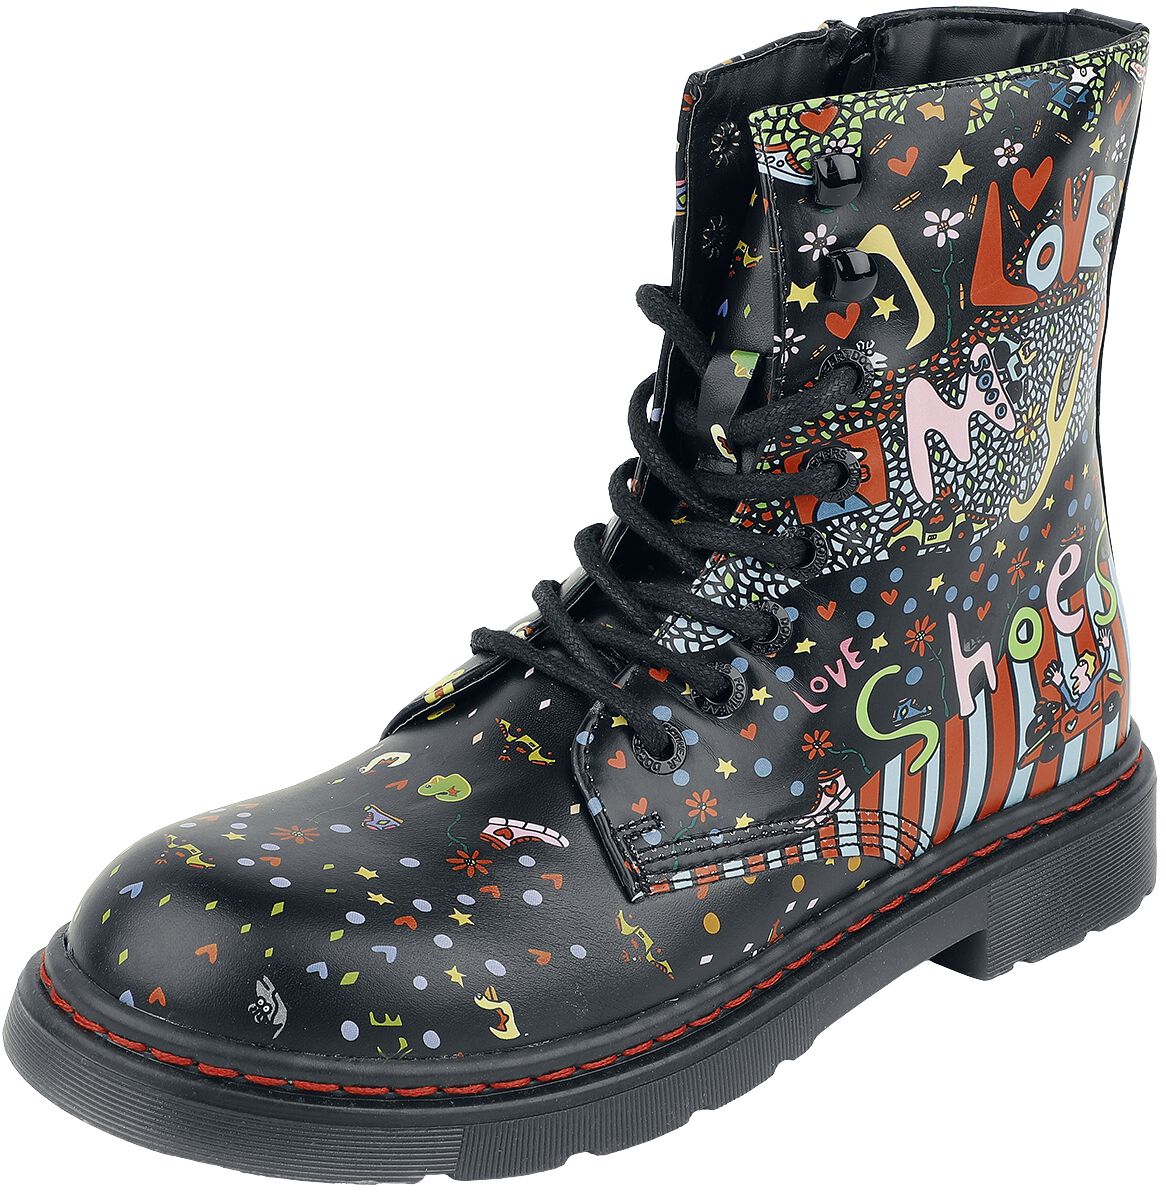 Image of Dockers by Gerli Dockers x Arts Boots multicolor